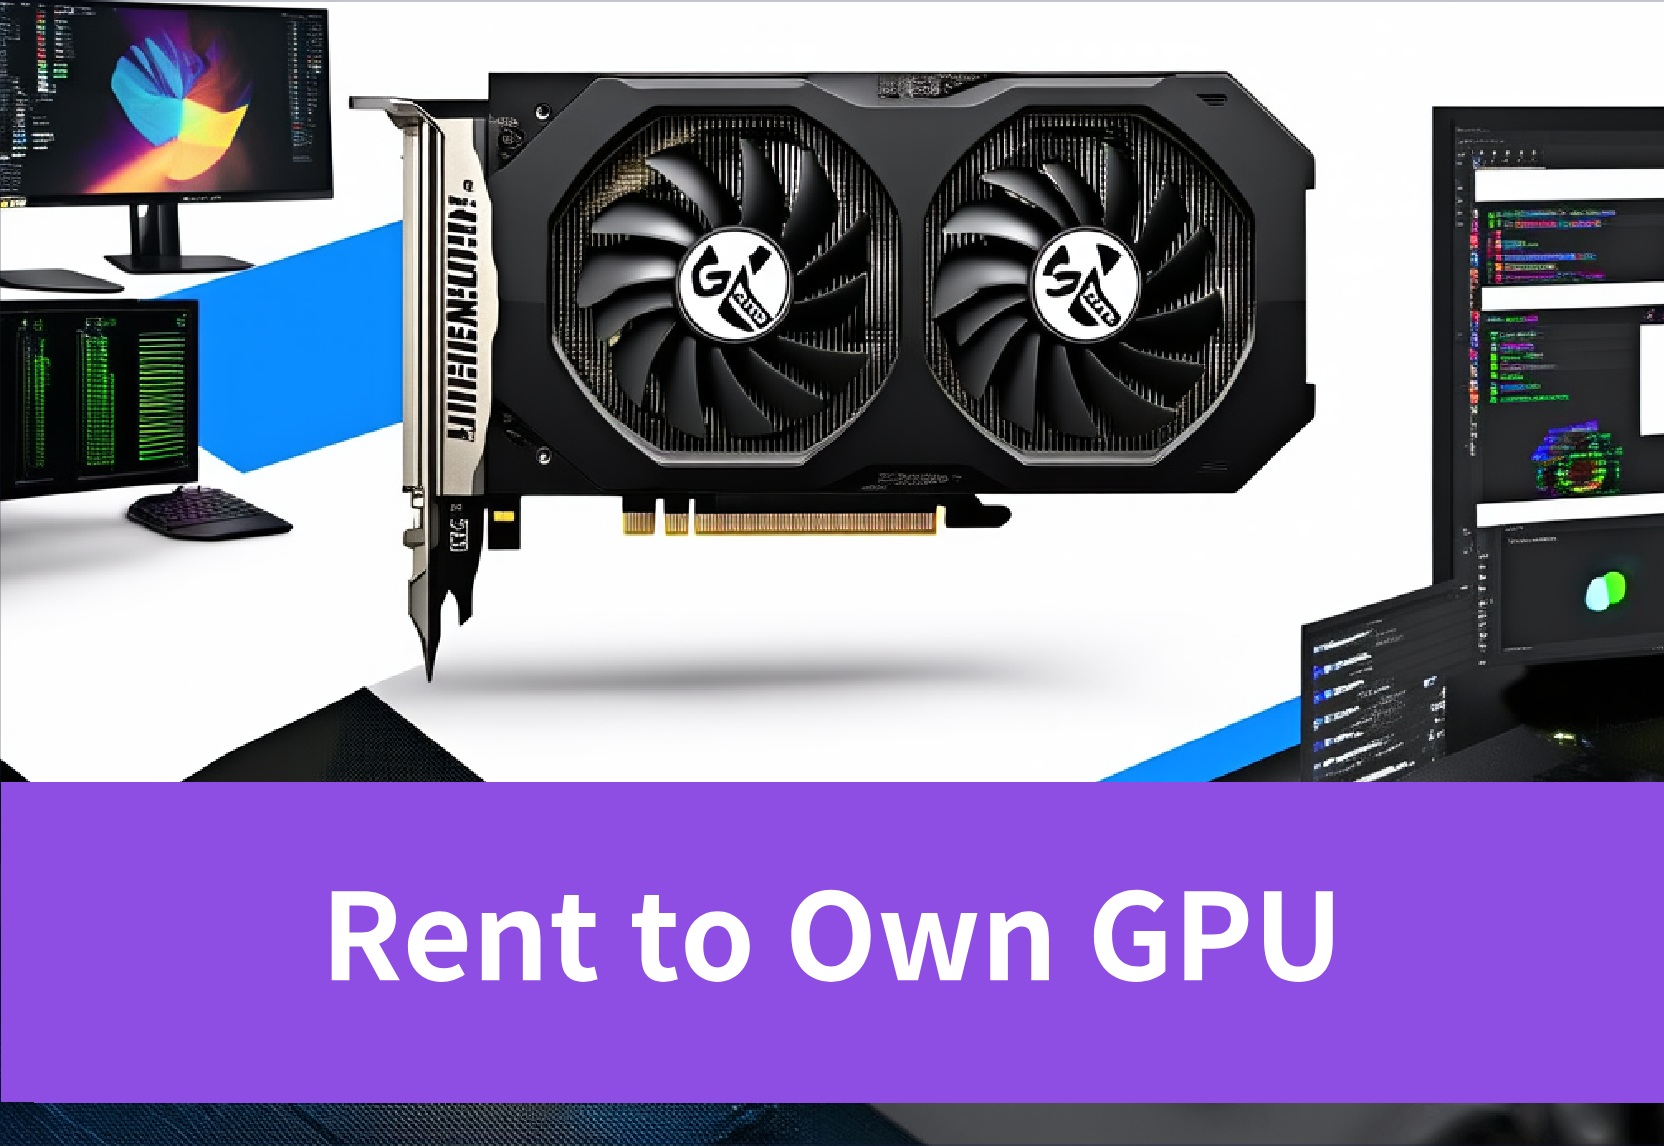 What is Rent to Own GPU? - A Useful Guideline